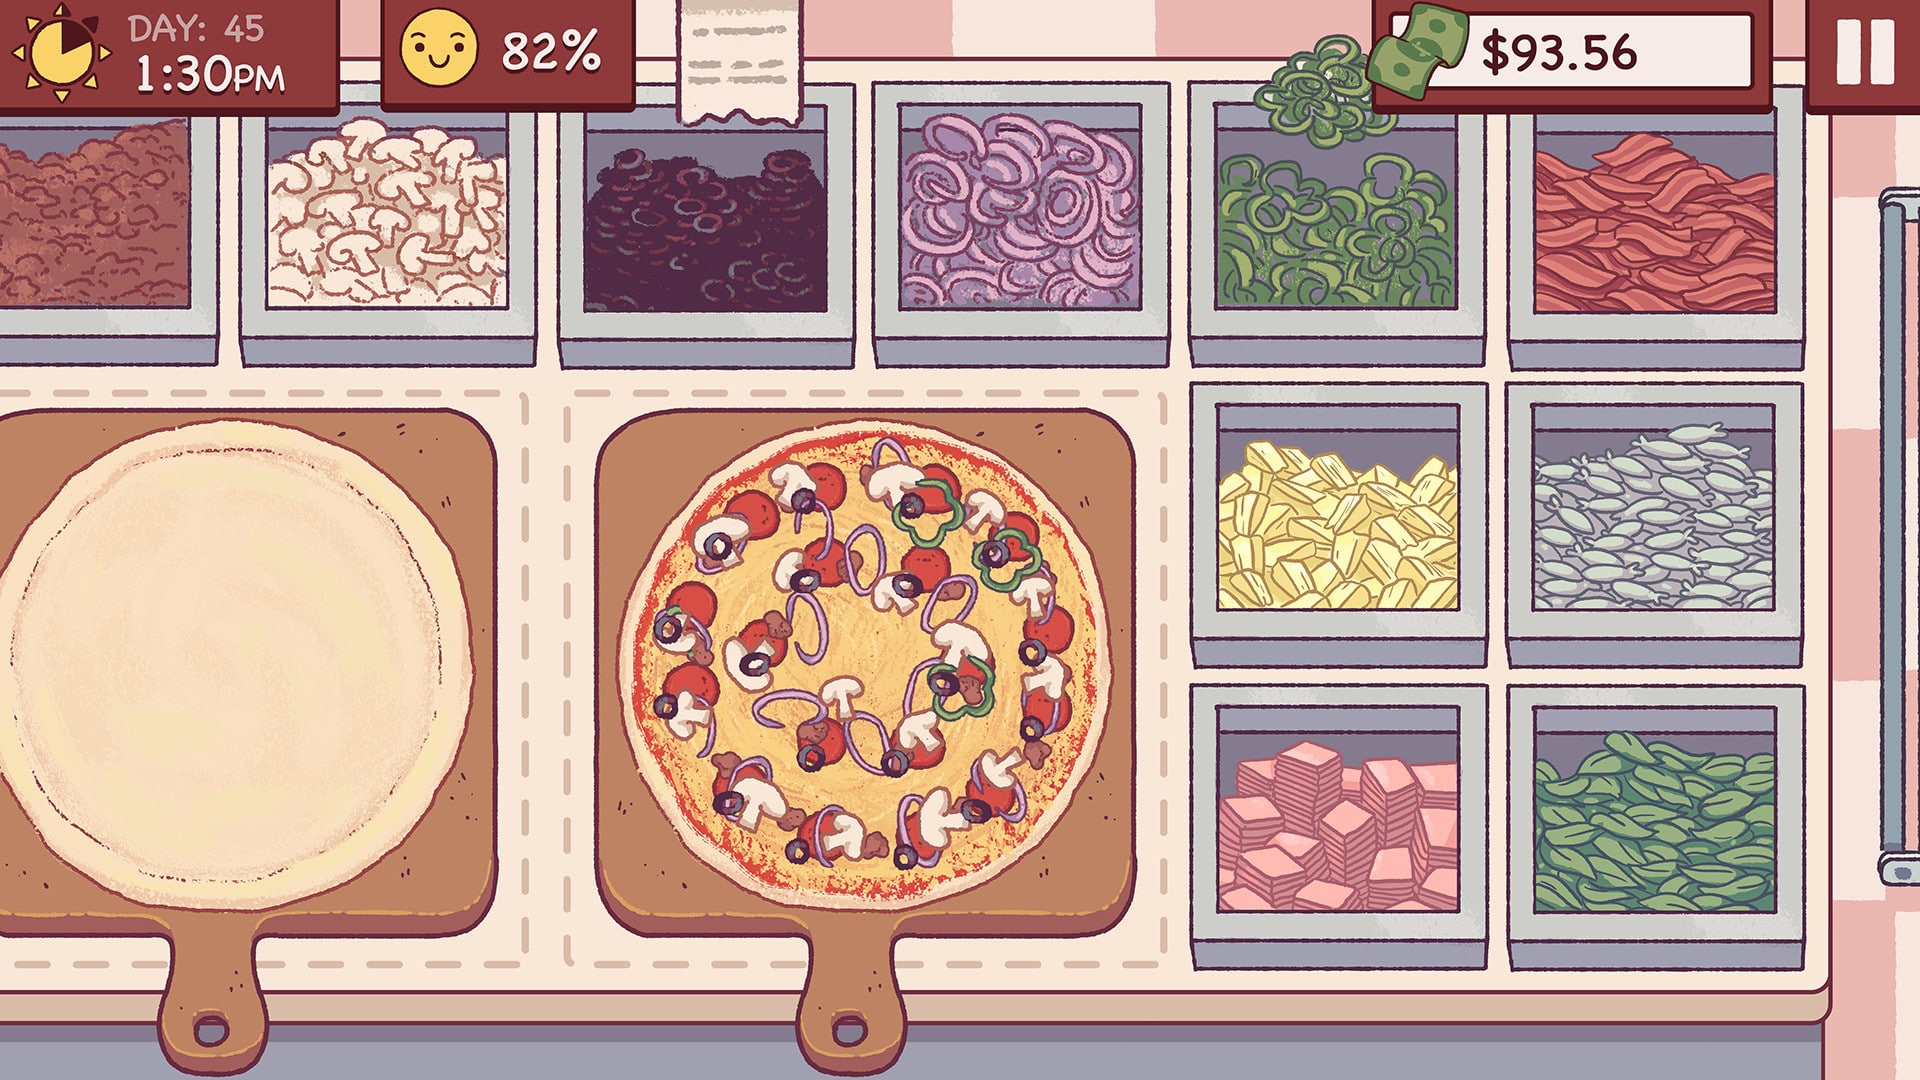 Good Pizza, Great Pizza - Cooking Simulator Game Download